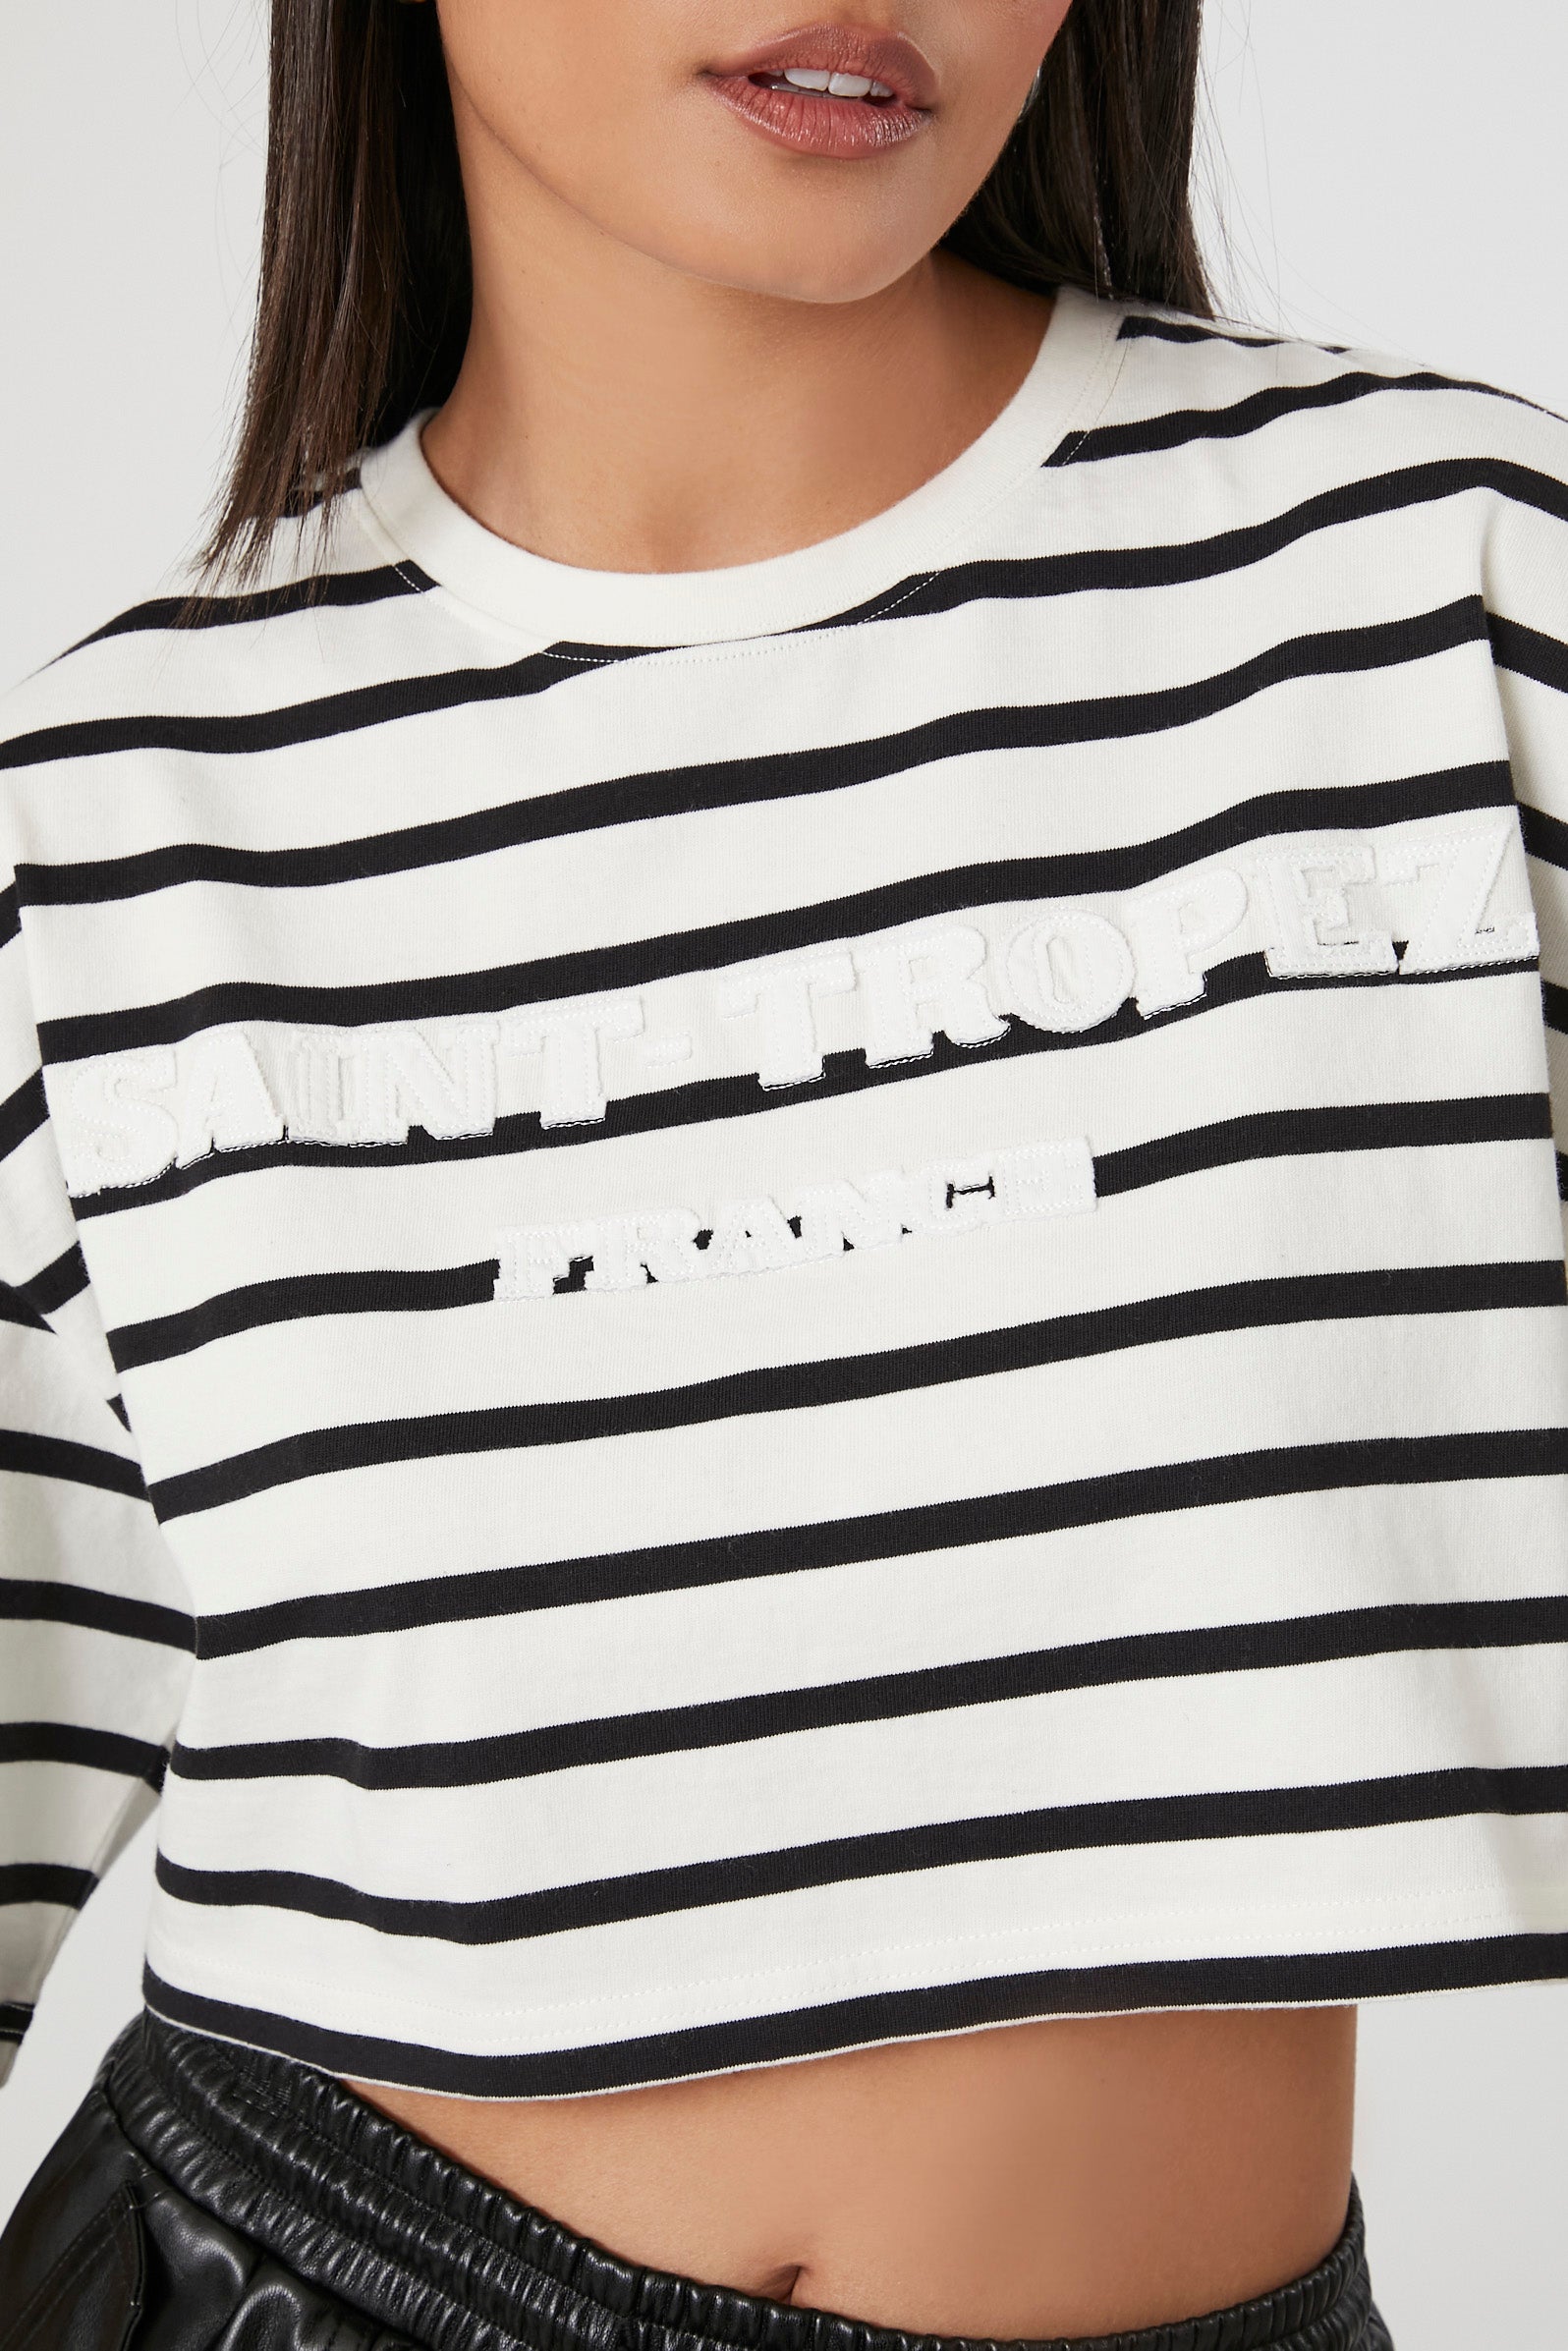 Saint Tropez Embroidered Striped Cropped T-Shirt